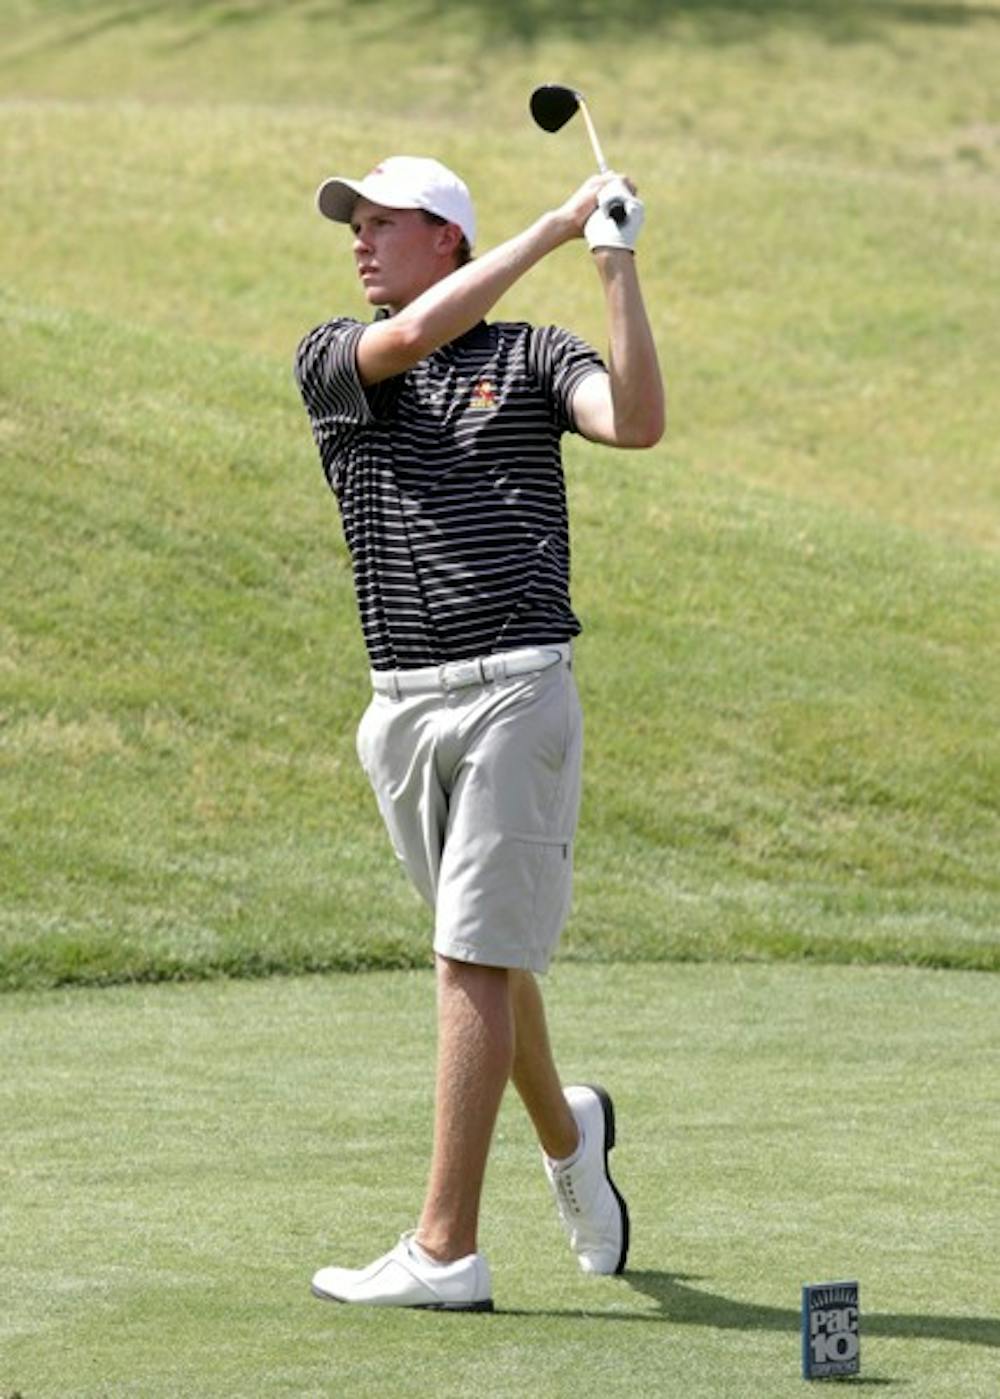 Senior Spencer Fletcher tees off at the Pac-10 Championships in 2010. The struggling men’s golf team is looking for improvements at the GCAA Match Play early next week. (Photo courtesy of Steve Rodriguez)